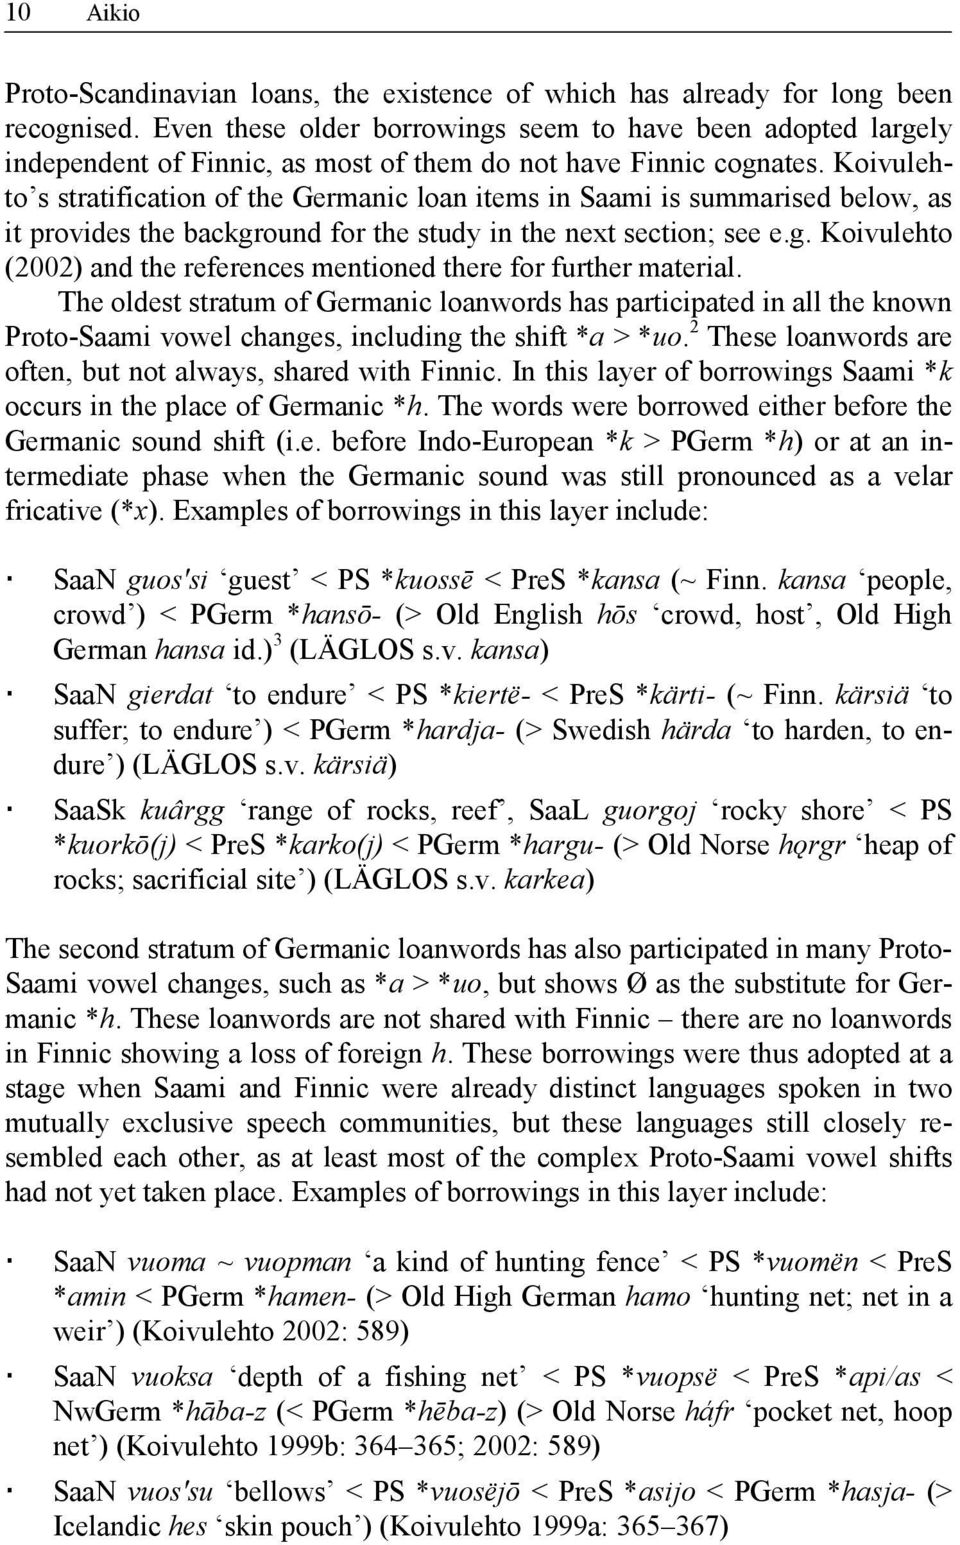 Koivulehto s stratification of the Germanic loan items in Saami is summarised below, as it provides the background for the study in the next section; see e.g. Koivulehto (2002) and the references mentioned there for further material.